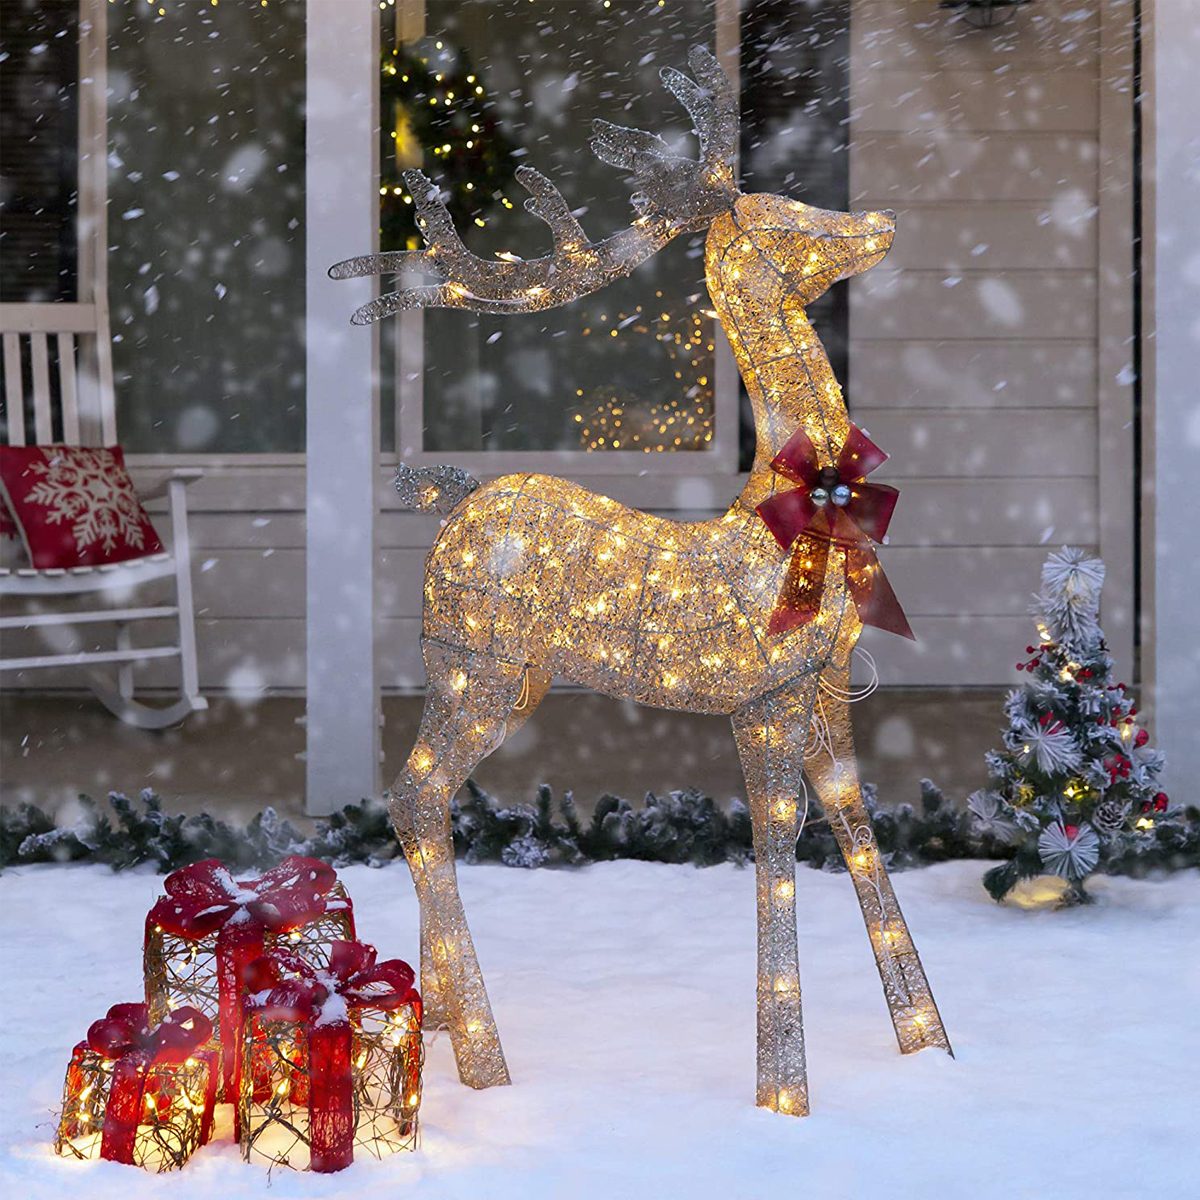 Best Choice Products 5ft 3d Pre Lit Gold Glitter Christmas Reindeer Buck Holiday Yard Decoration With 150 Incandescent Lights Ecomm Amazon.com